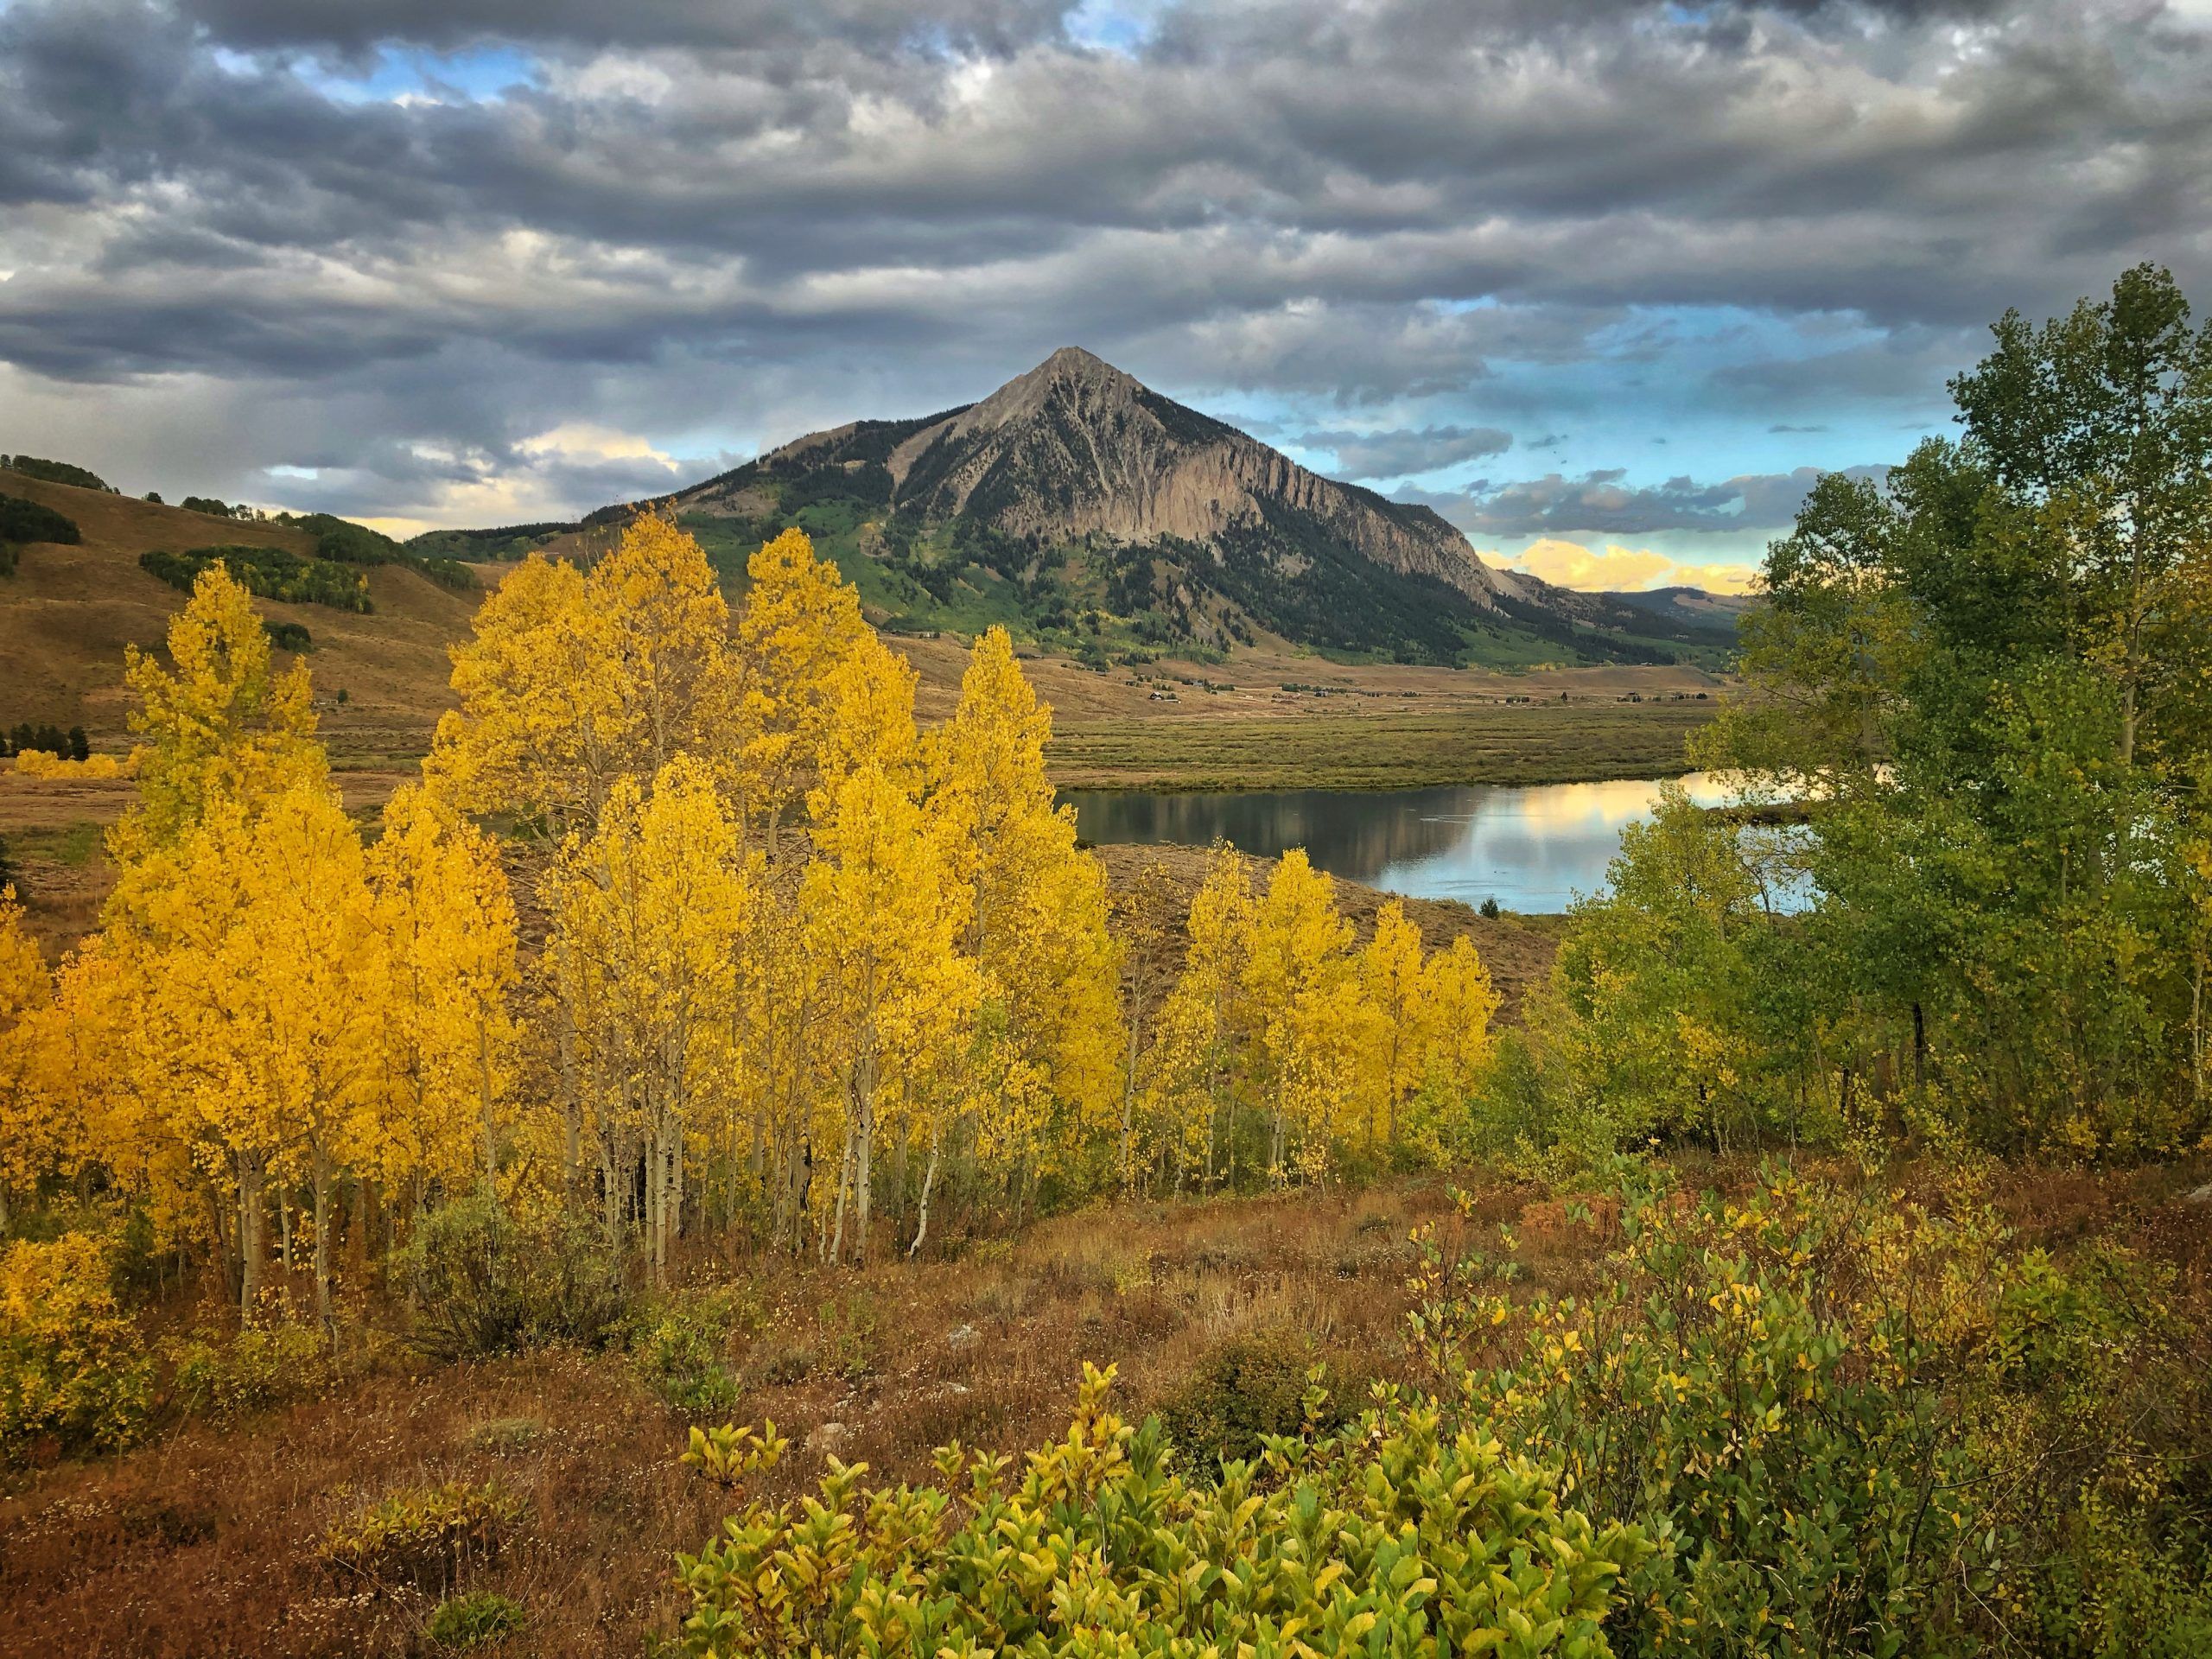 Crested Butte Mountain in Crested Butte, Colorado on a cloudy fall day with yellow aspen leaves.